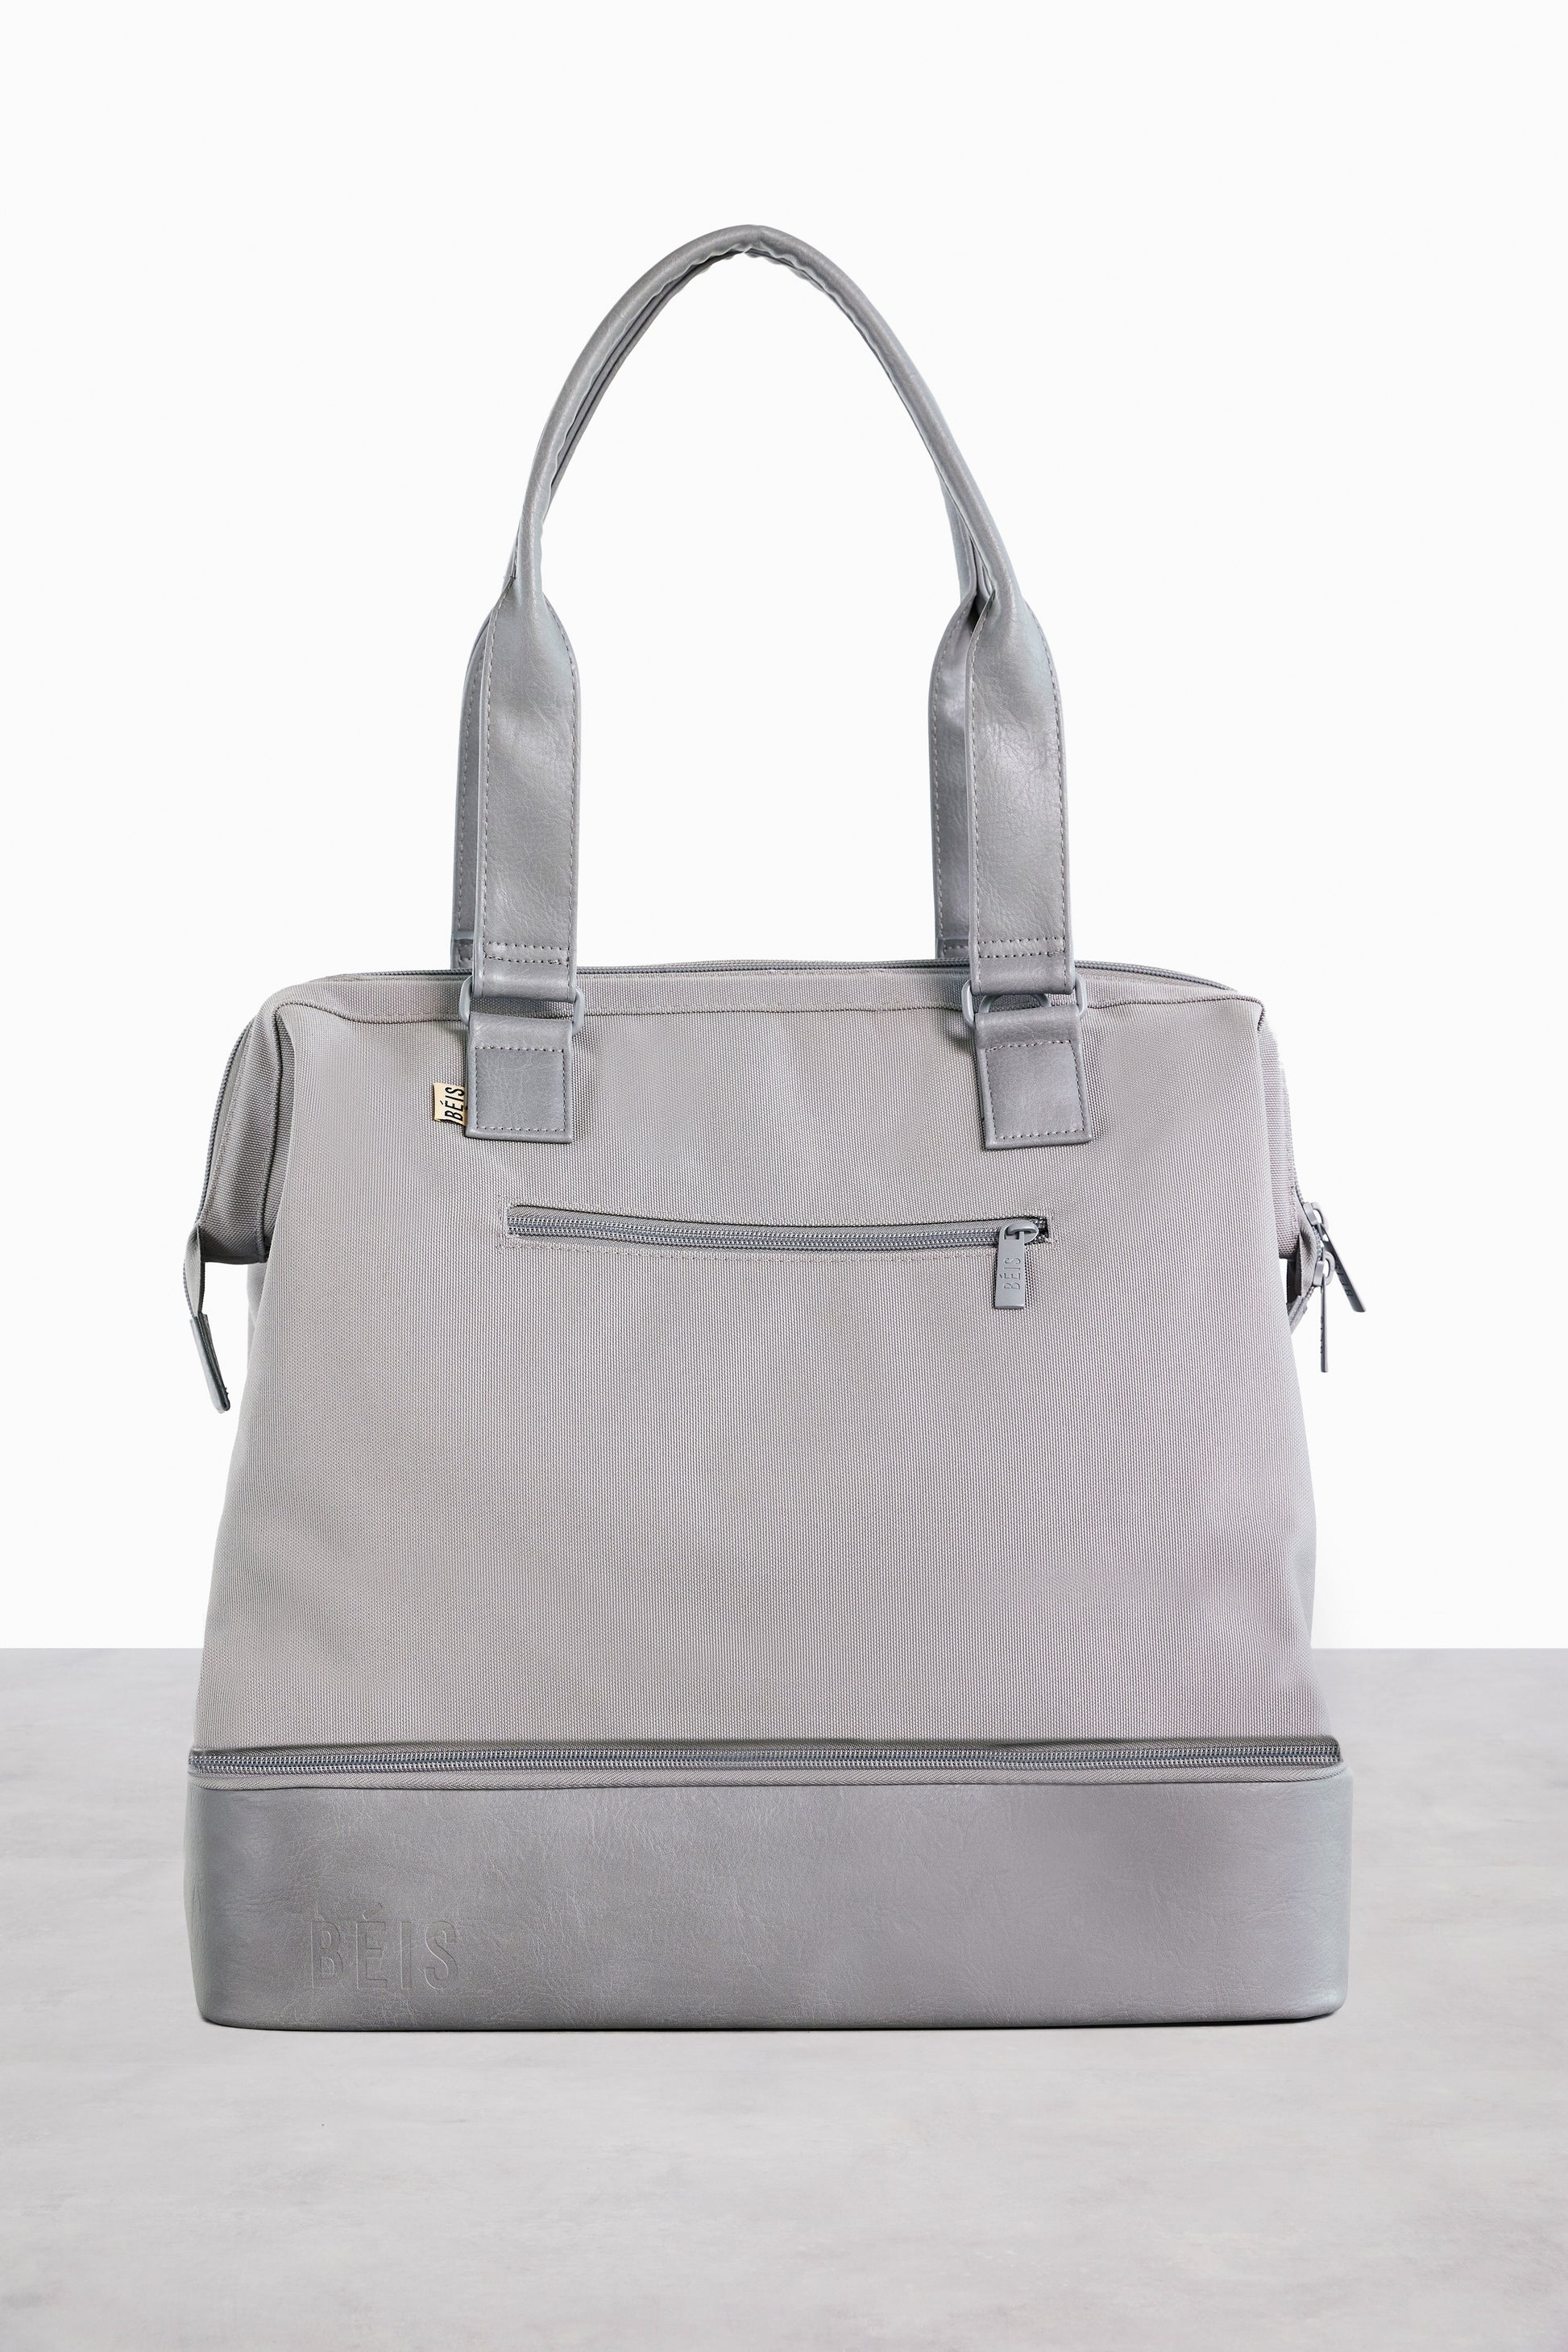 Béis The Mini Weekend Travel Bag in Gray